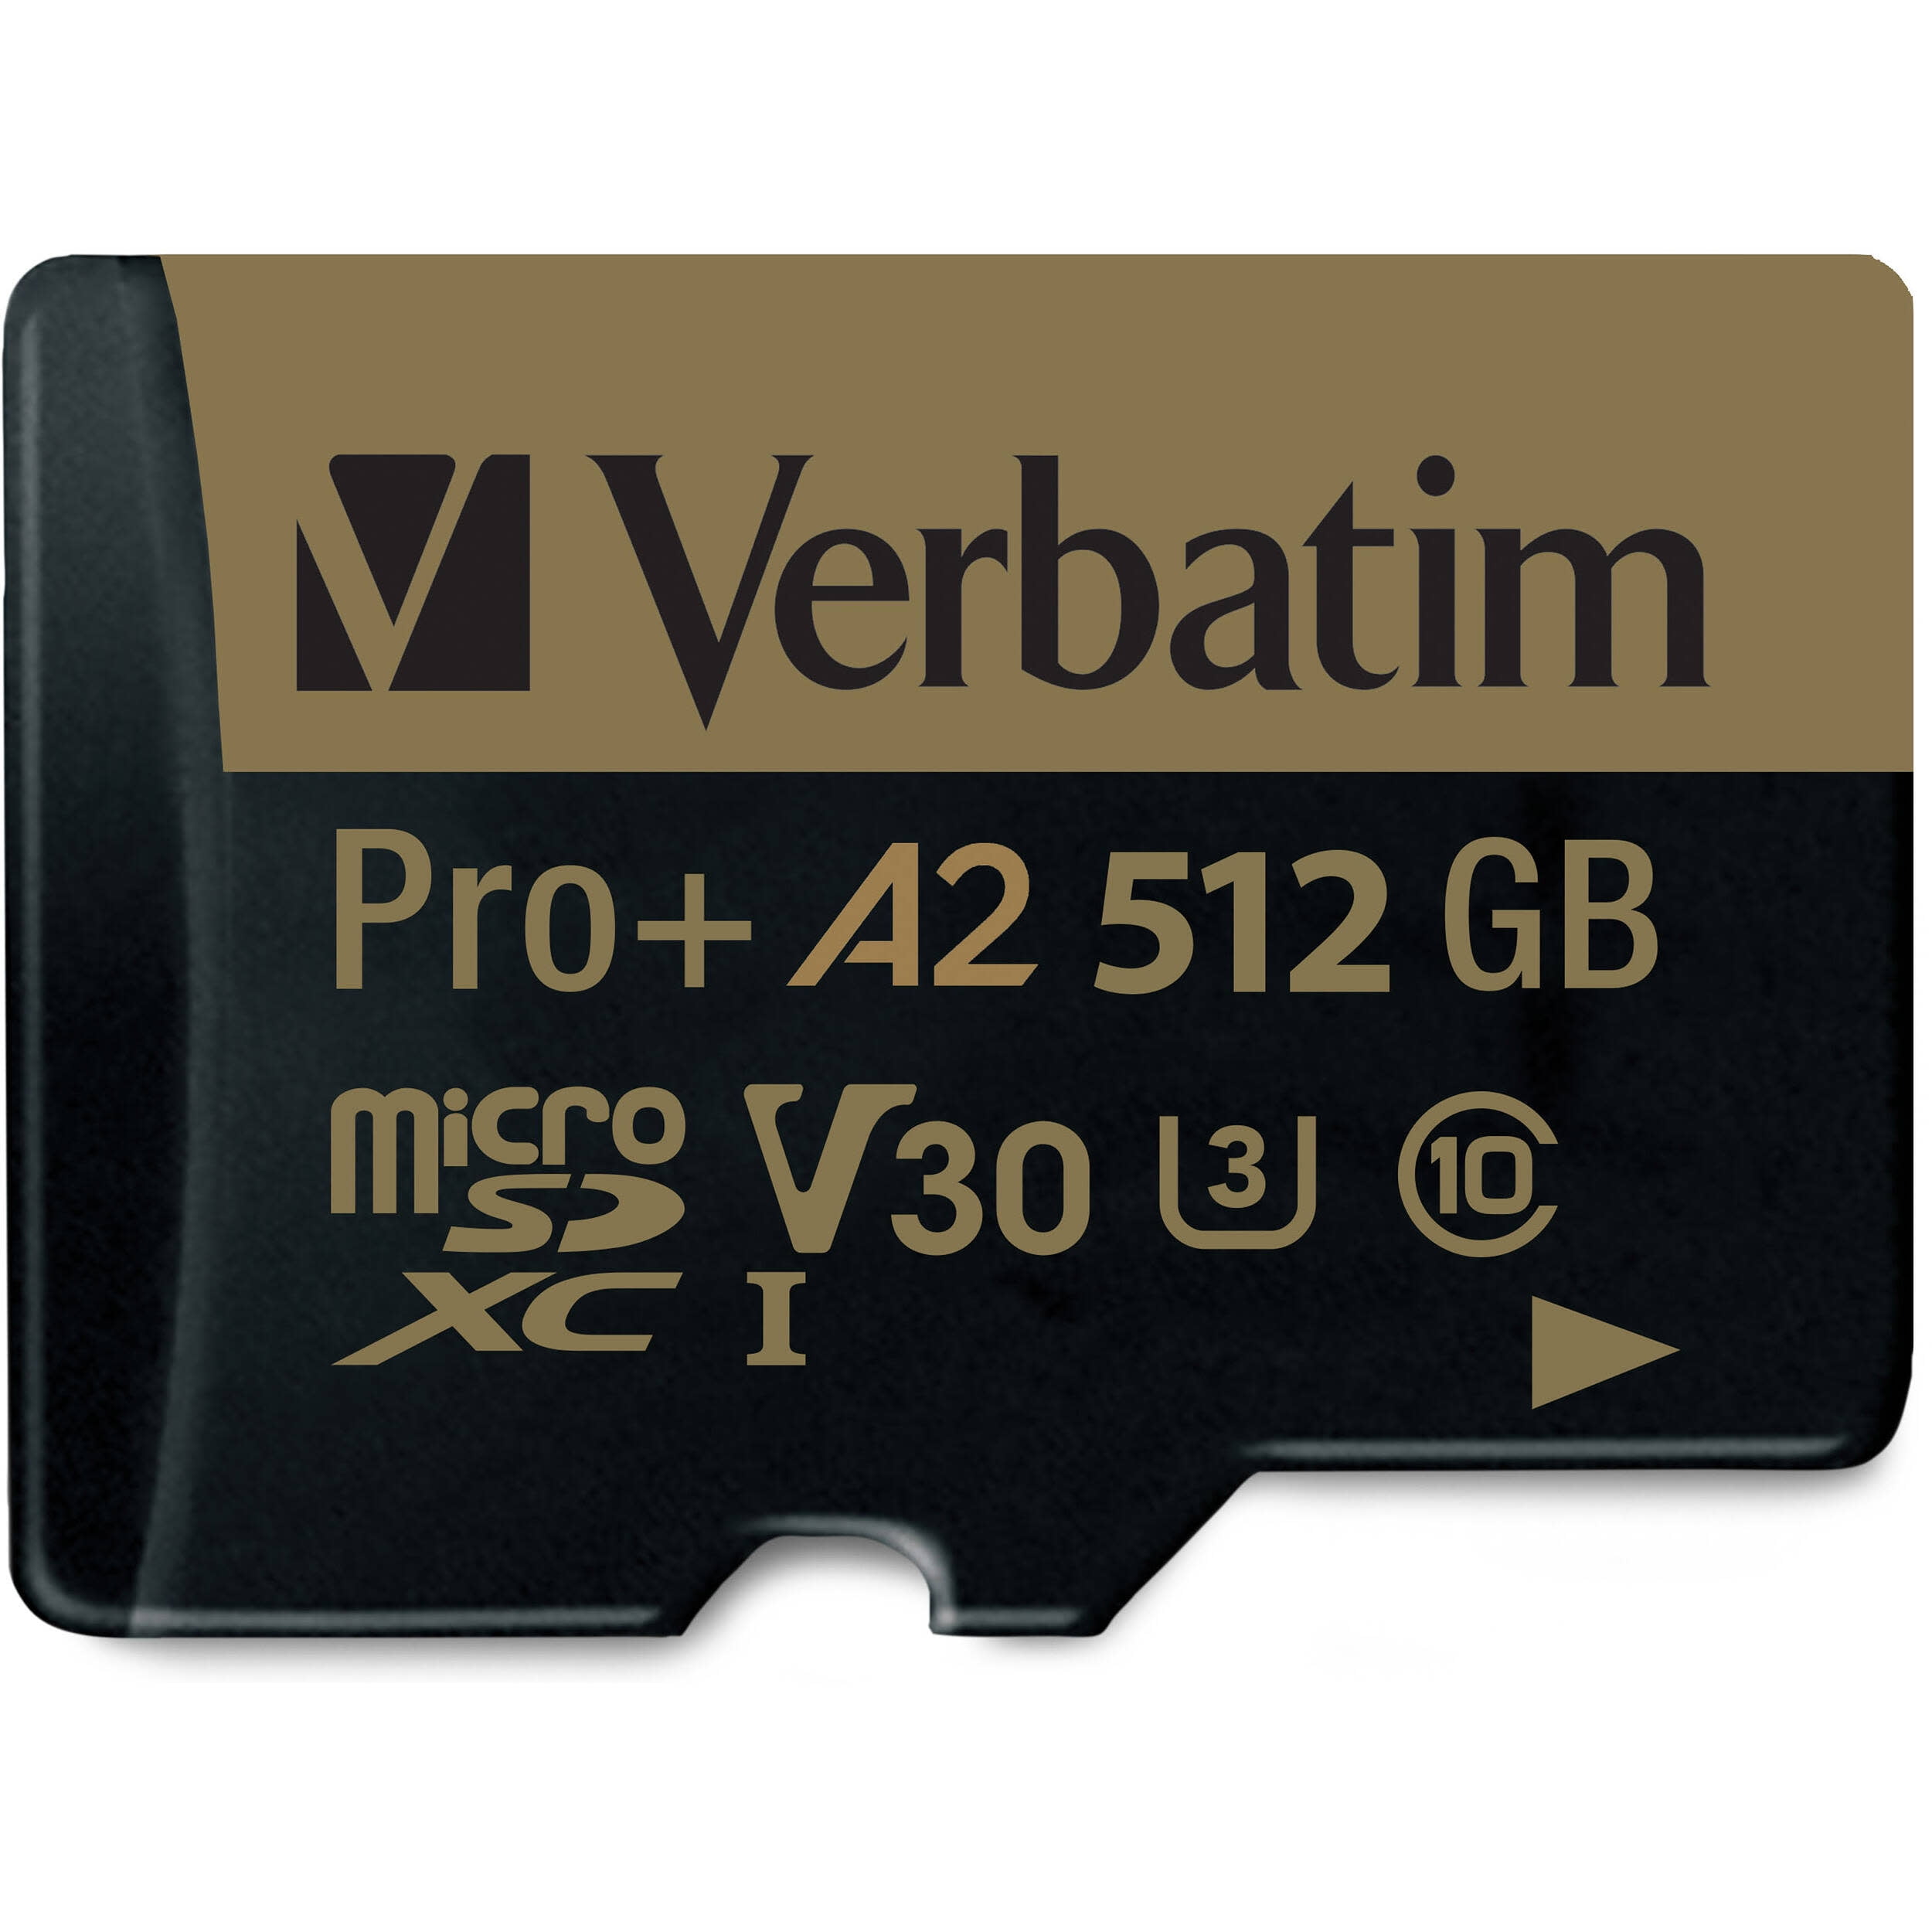 UHS-I V30 U3 Class 10 with A2 Rating 70393 Verbatim 512GB Pro Plus 666X microSDXC Memory Card with Adapter 